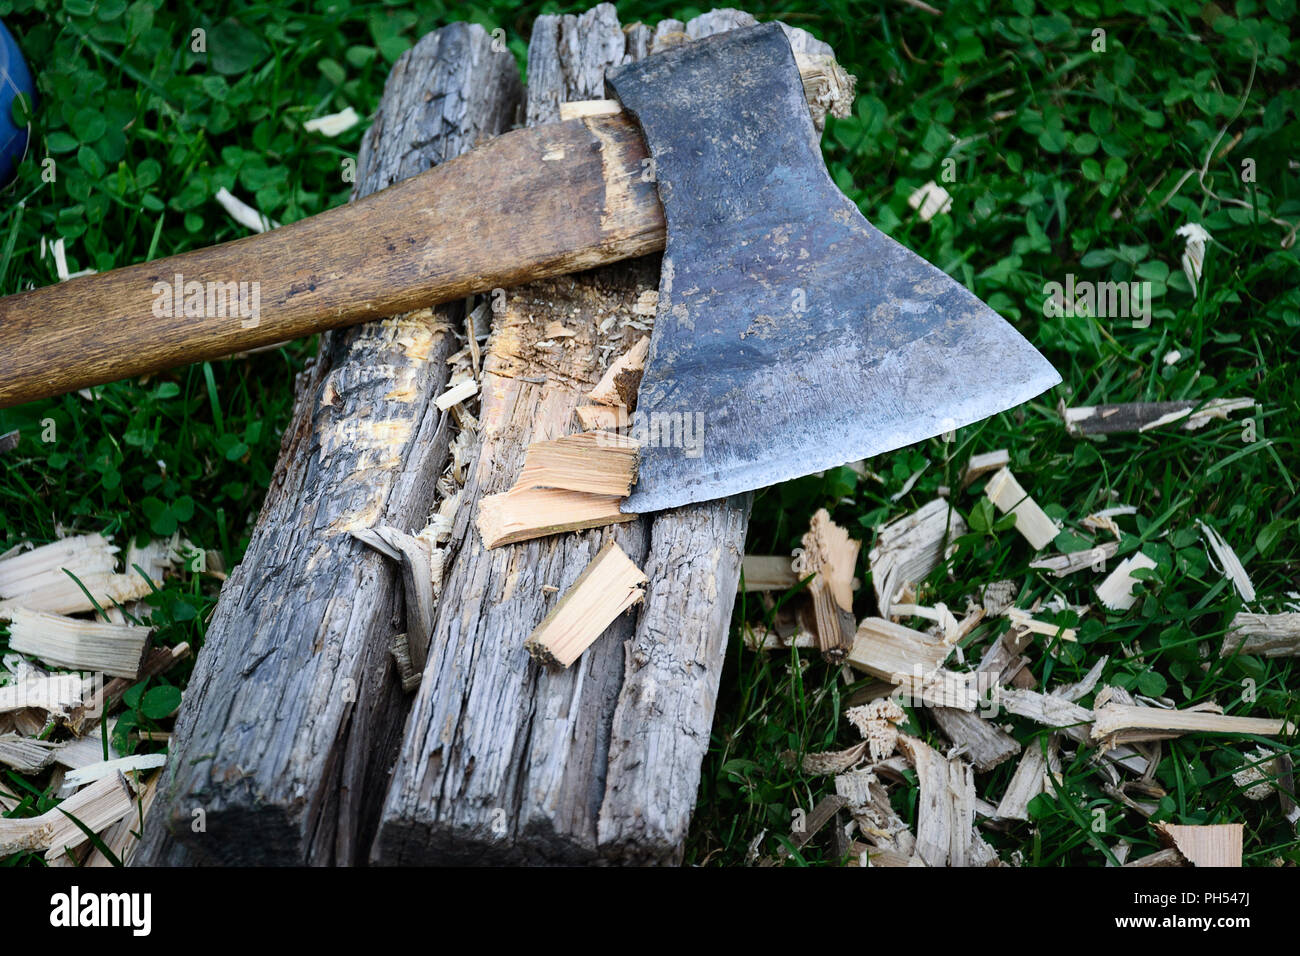 Axe with wood chips. horizontal Stock Photo